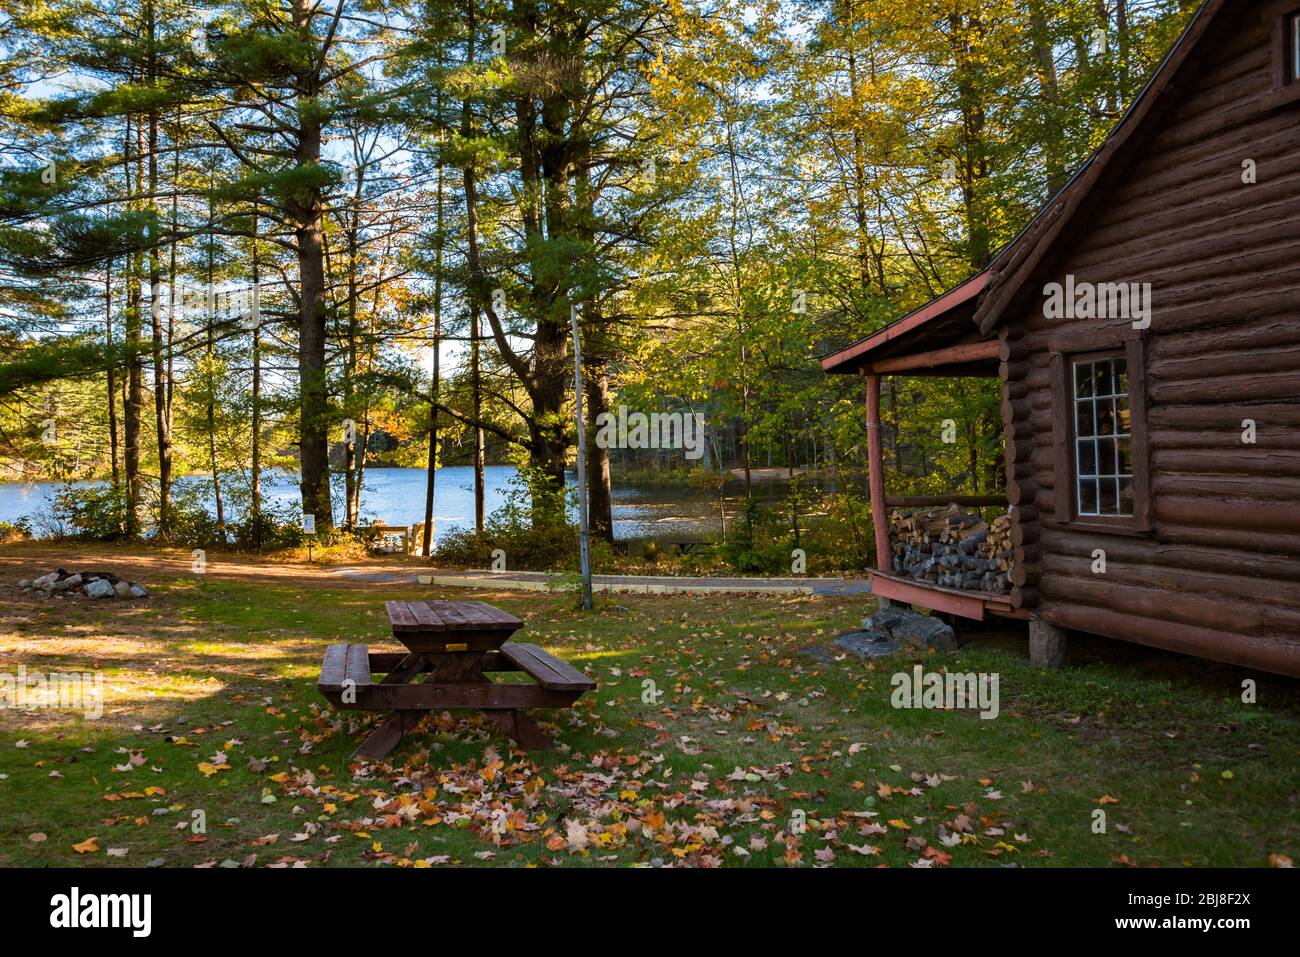 Rustic Lakeside Cabin Resort with Log Cabin, Picnic Table, Camp Fire Pit, & Lake Stock Photo